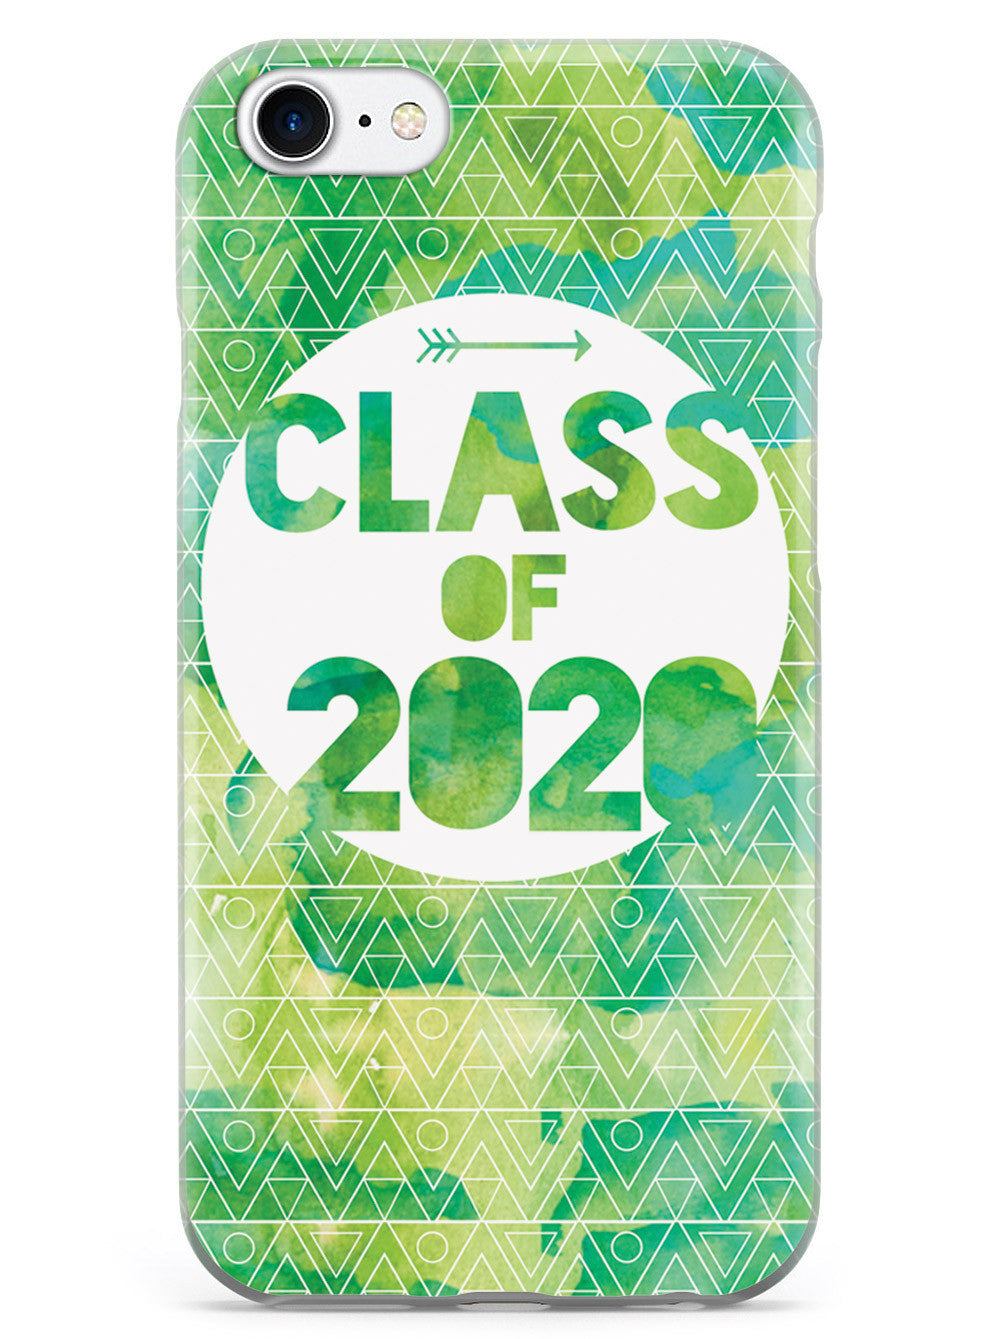 Class of 2020 - Green Watercolor Case